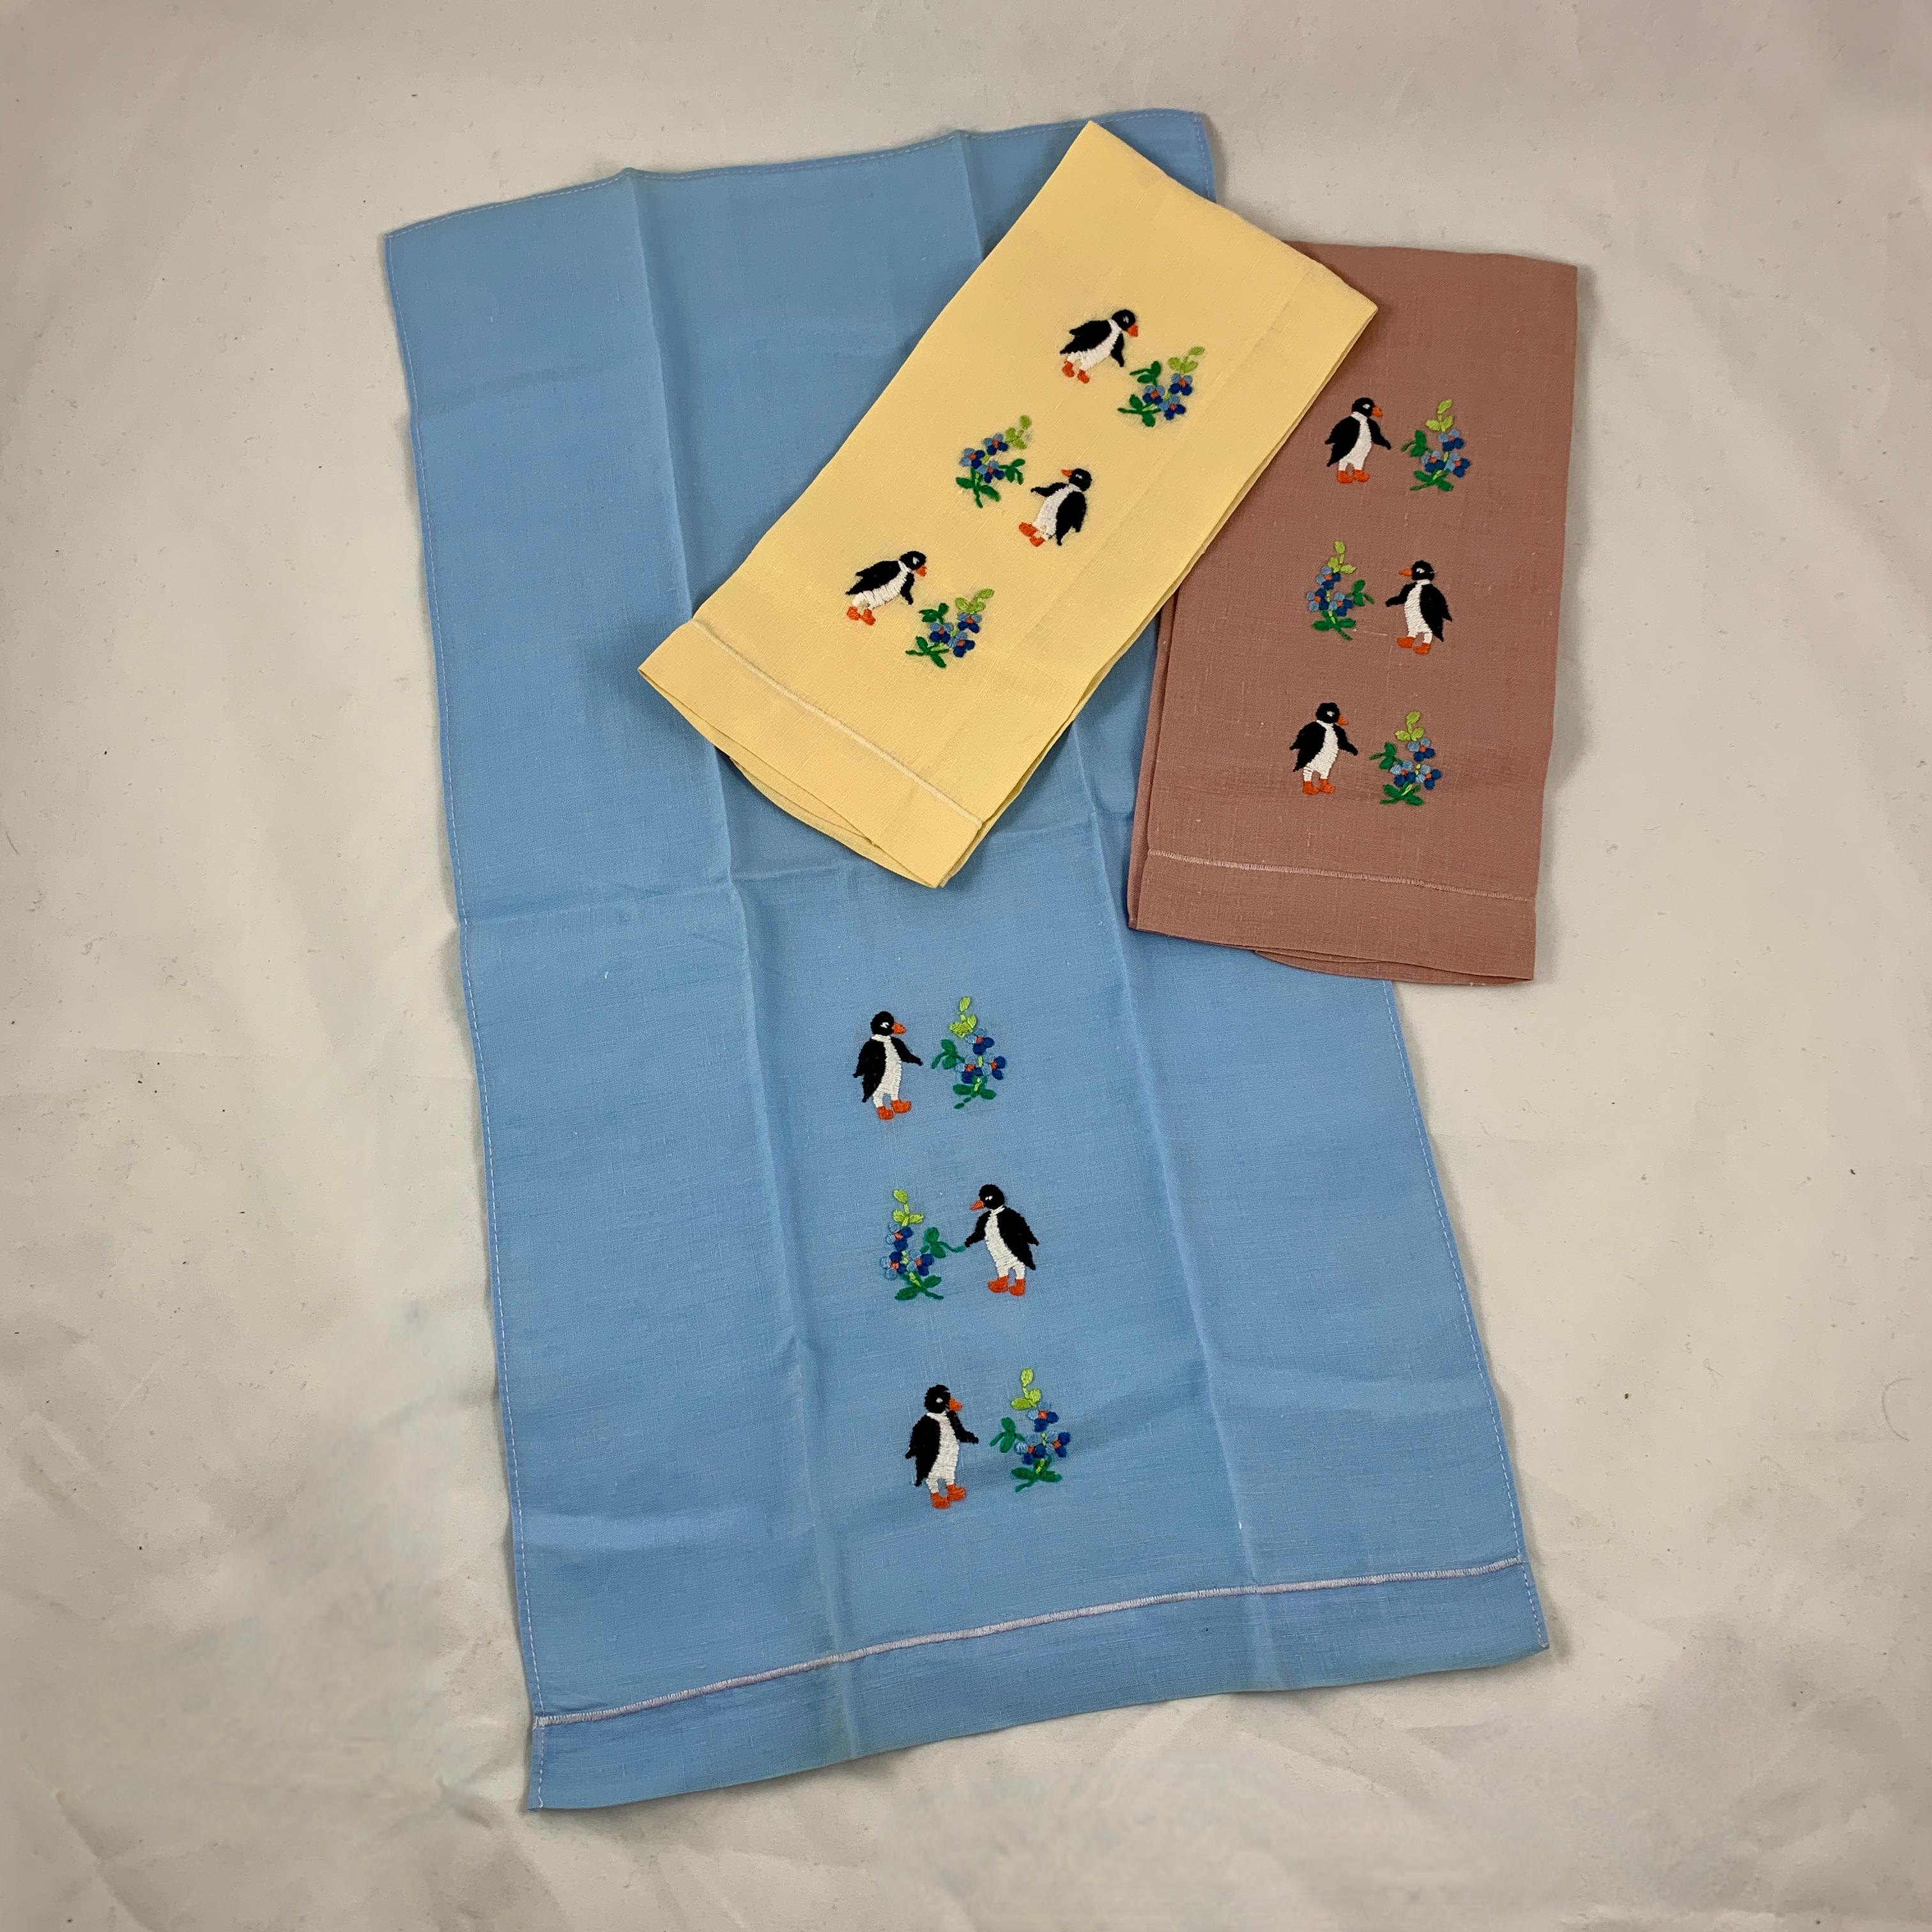 A charming set of three mid-century era guest towels, hand-embroidered with a trio of penguins and bouquets. In buttercup yellow, cornflower blue, and a brick red linen, nicely starched.

Measures: 19 inches L x 10 inches wide.
In marvelous